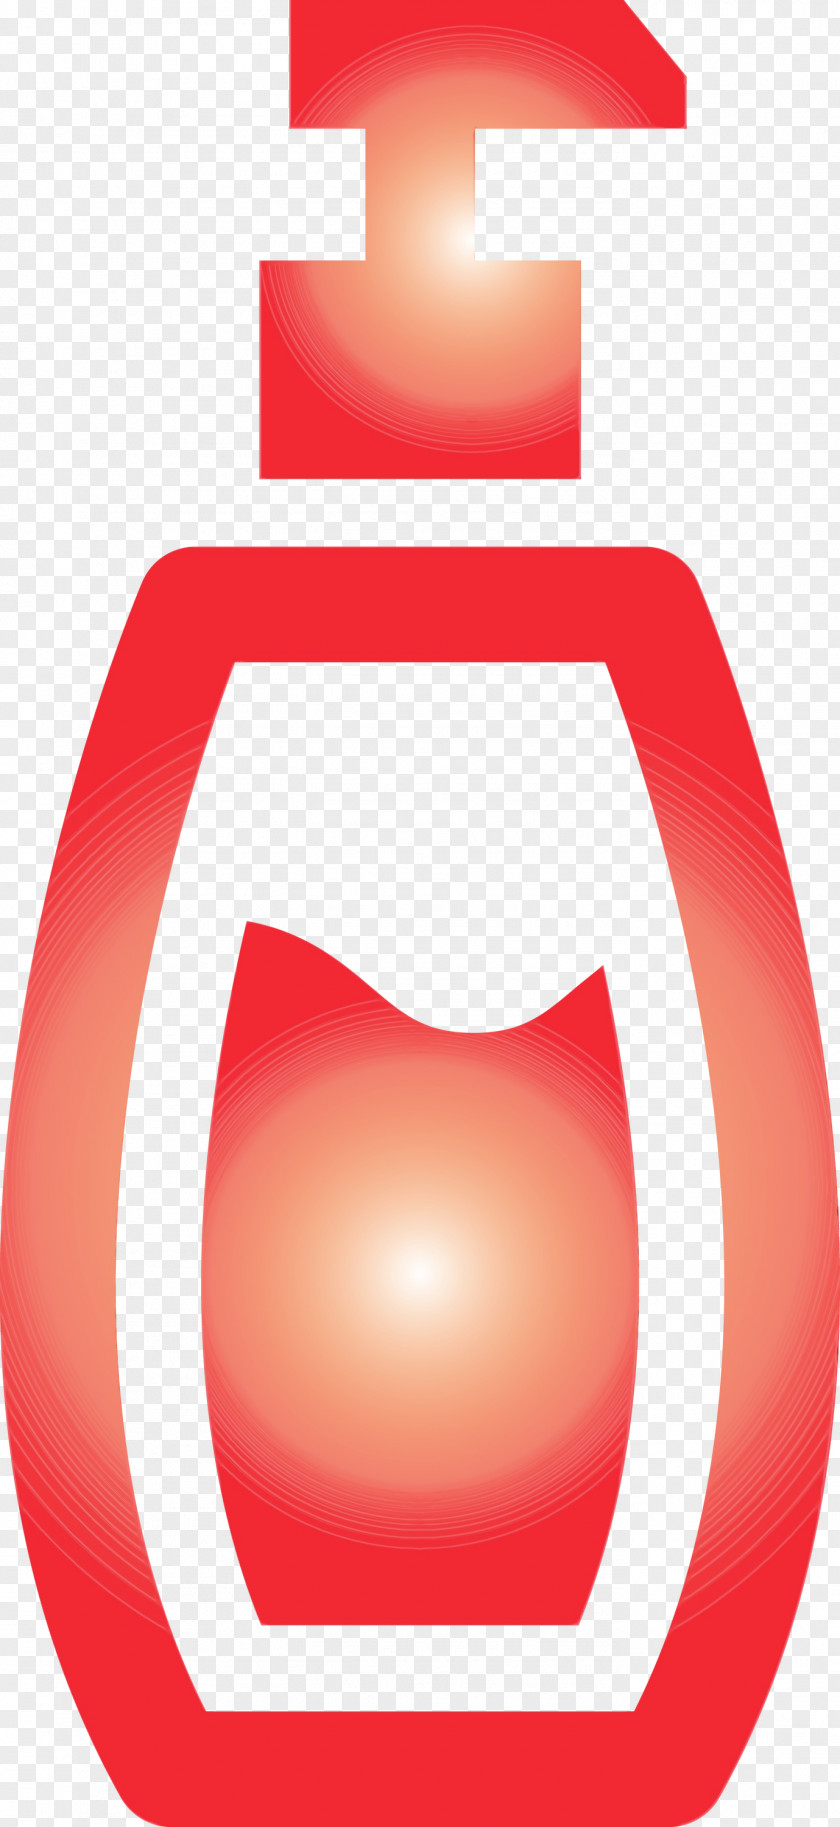 Red Material Property PNG